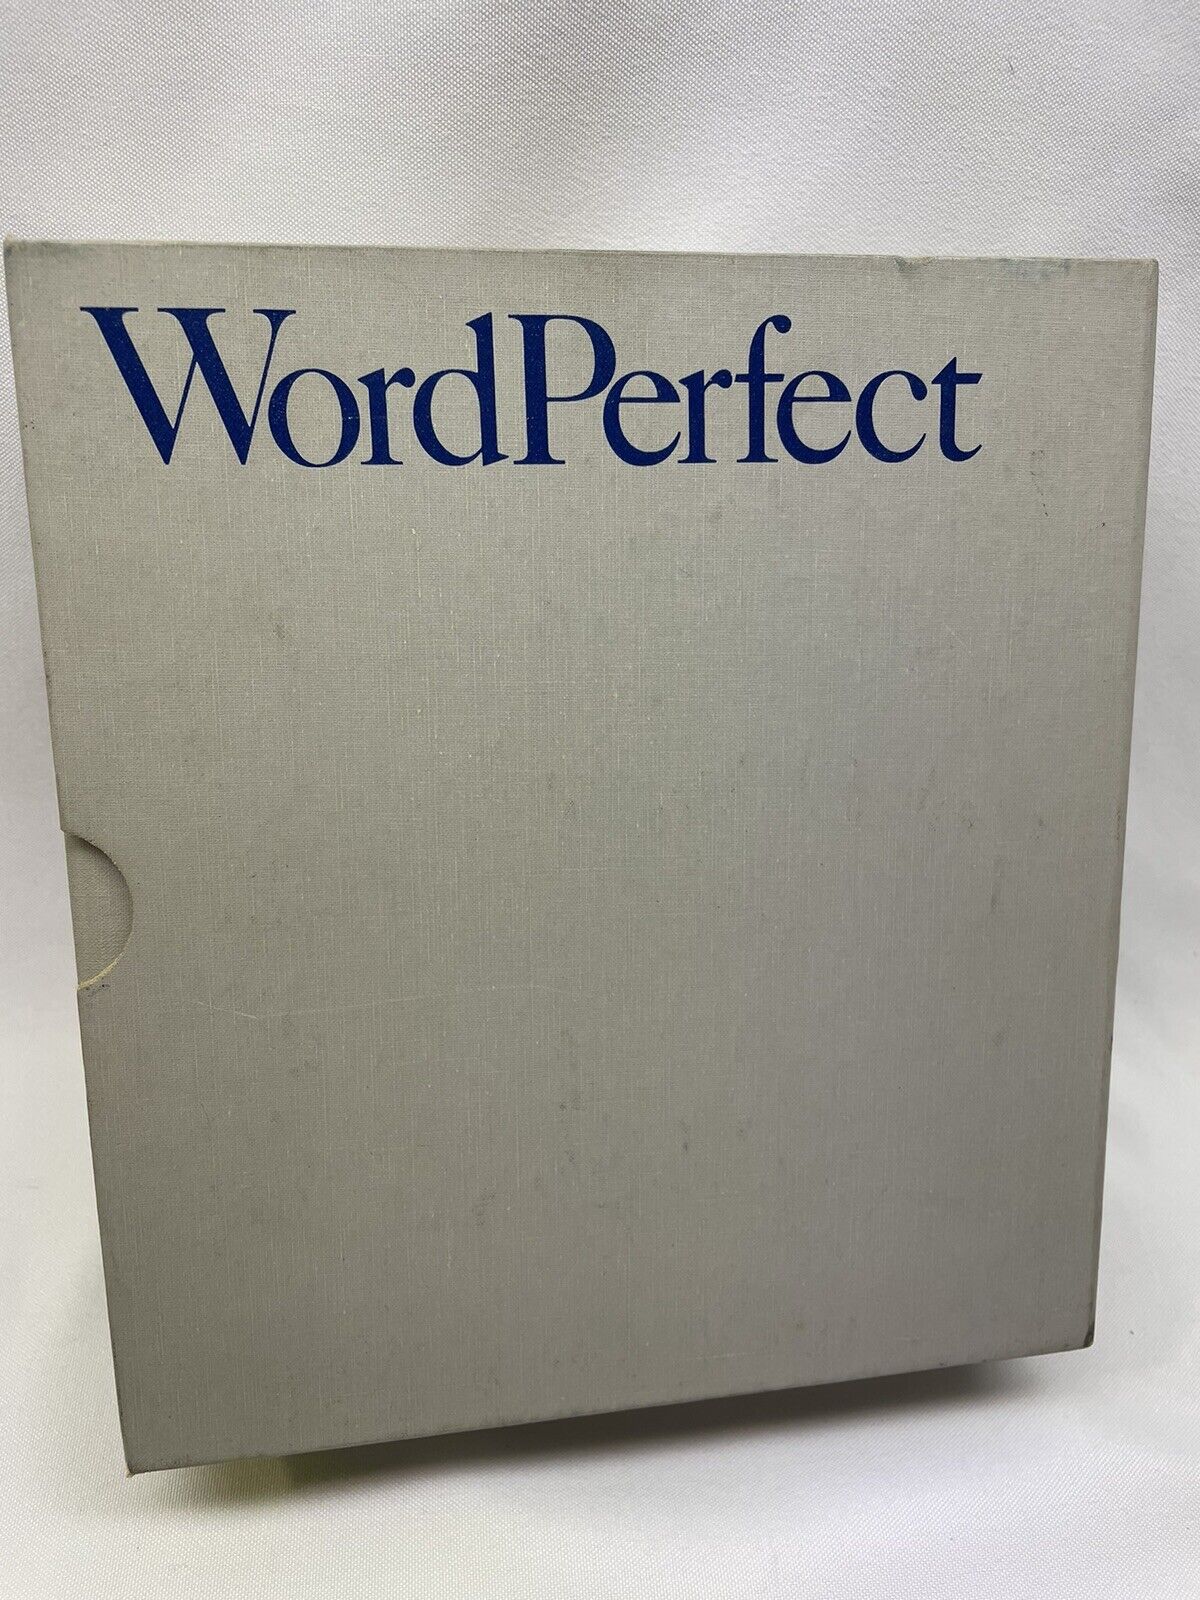 Vintage Microsoft WORD PERFECT Software IBM PC 5 Disks Ford Motor Company